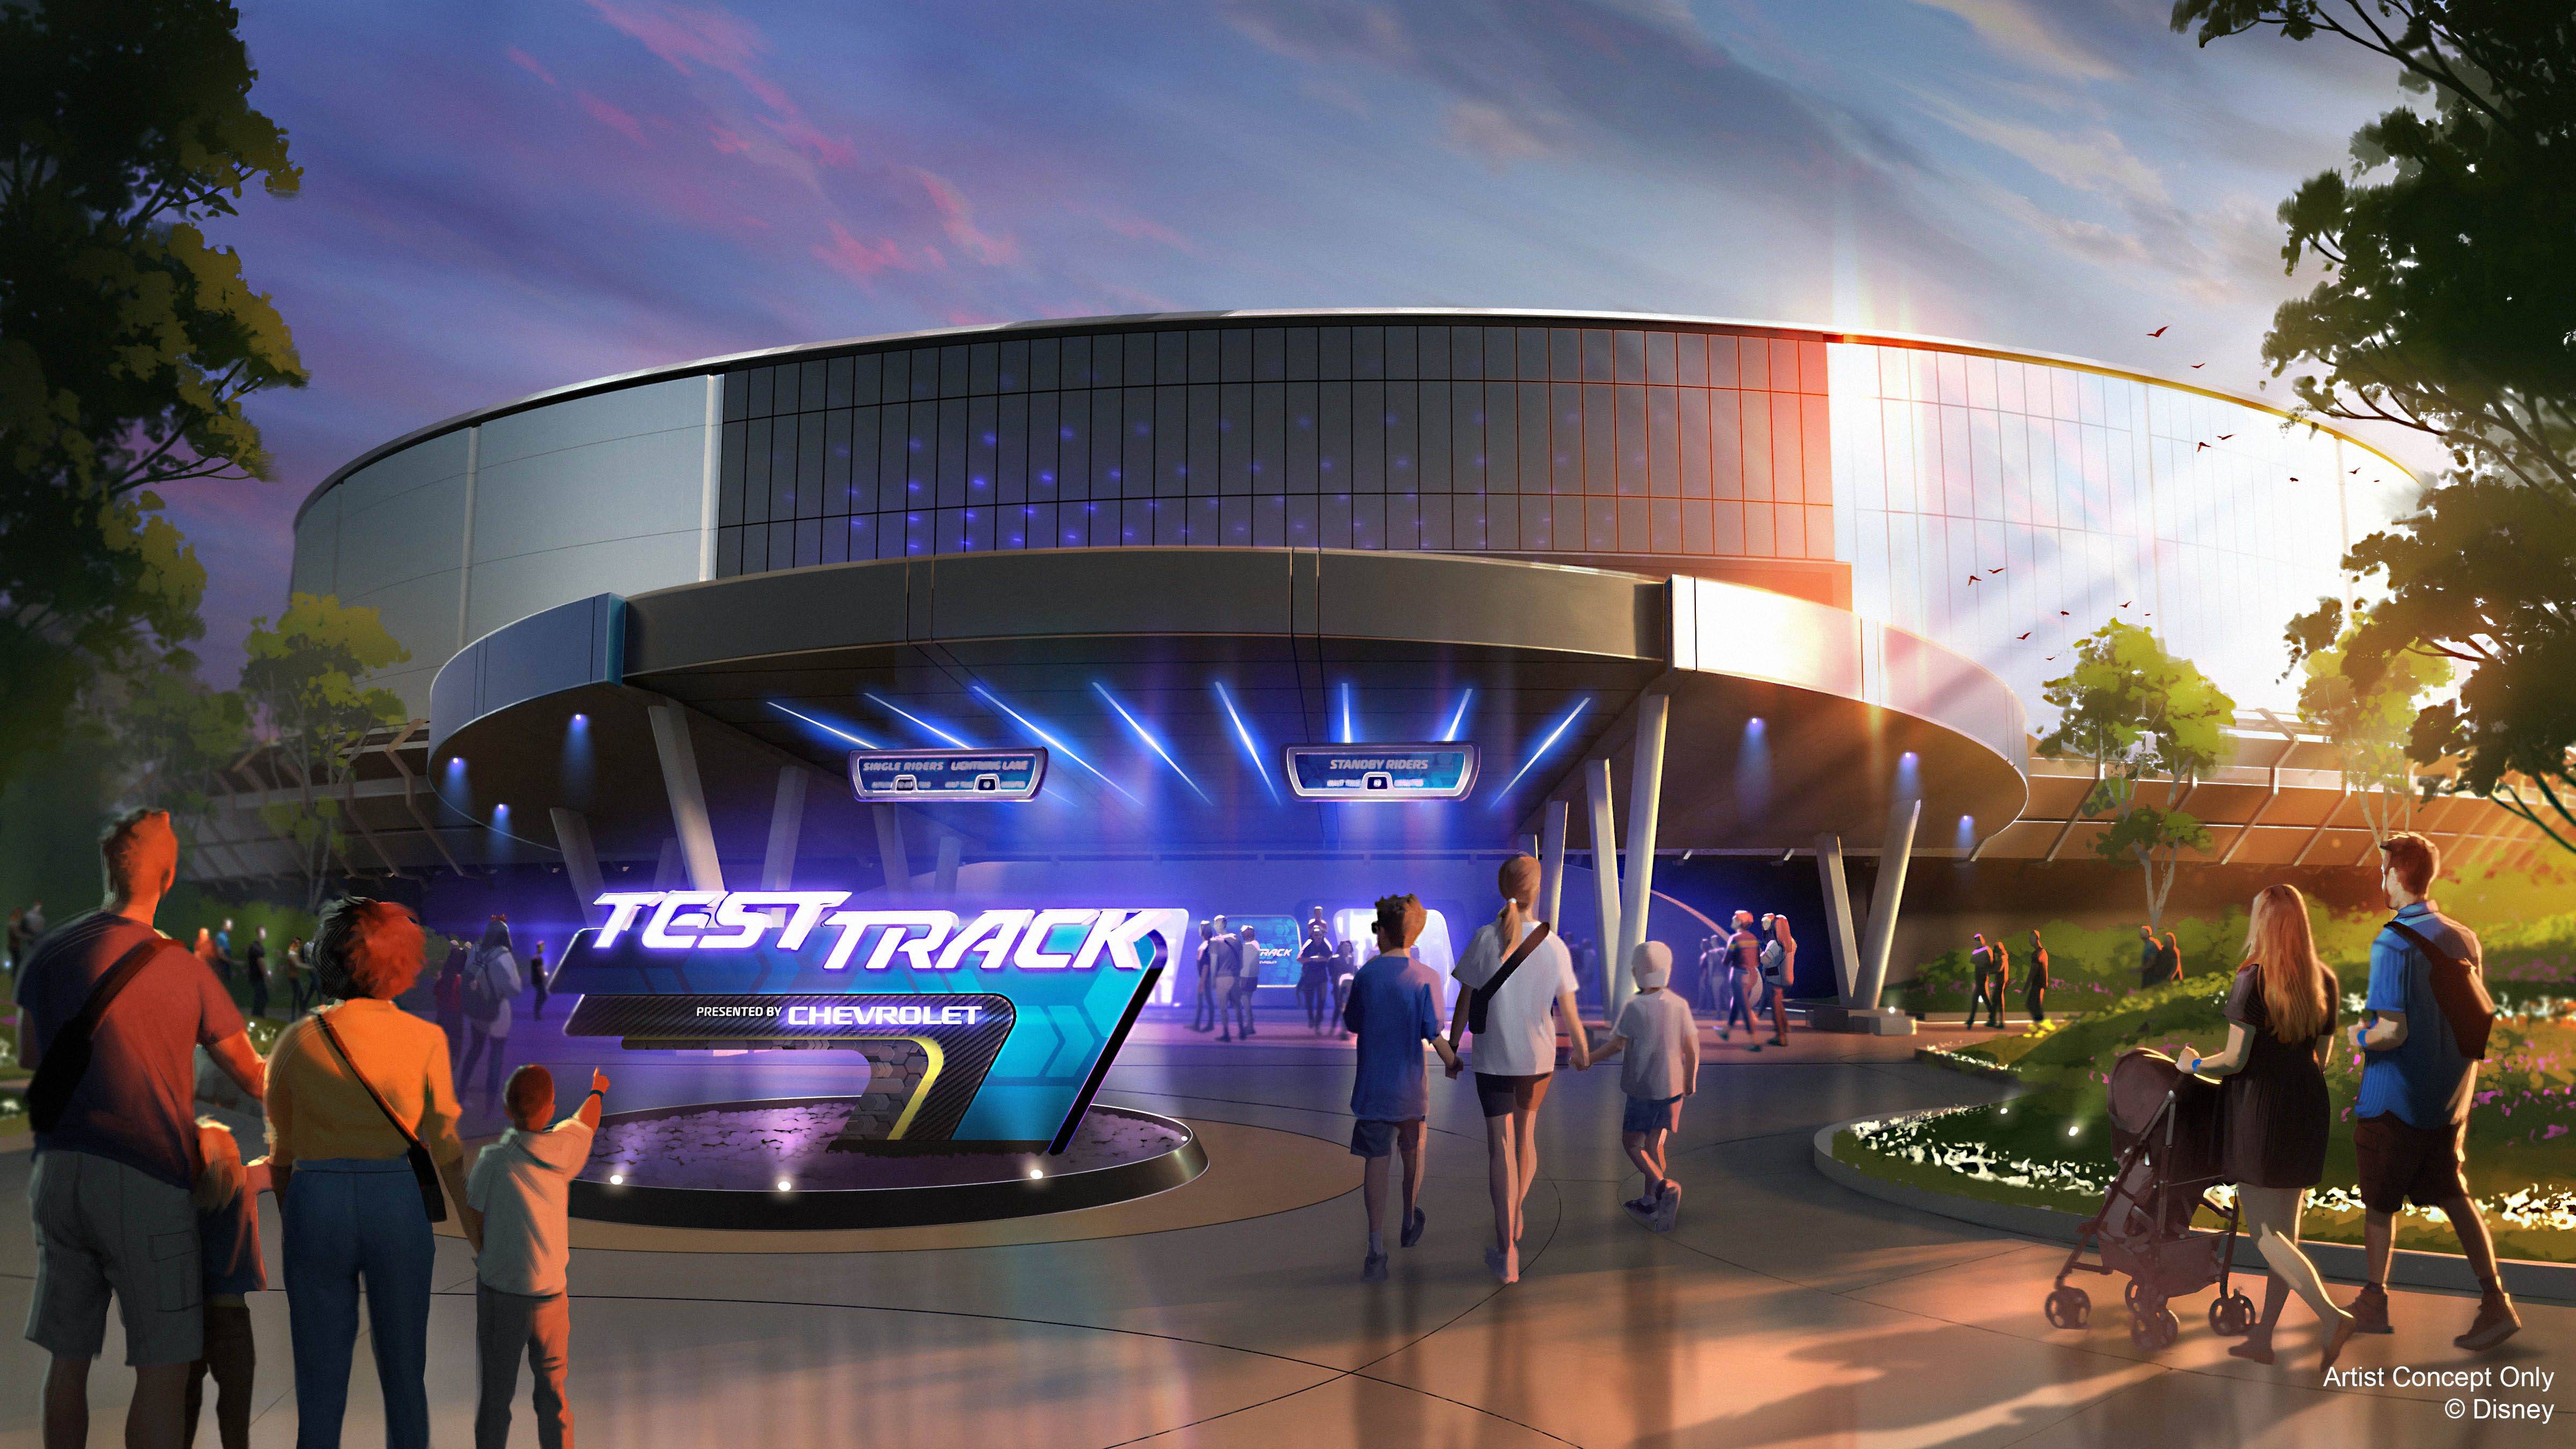 Test Track to be reimagined with inspiration from the original World of Motion